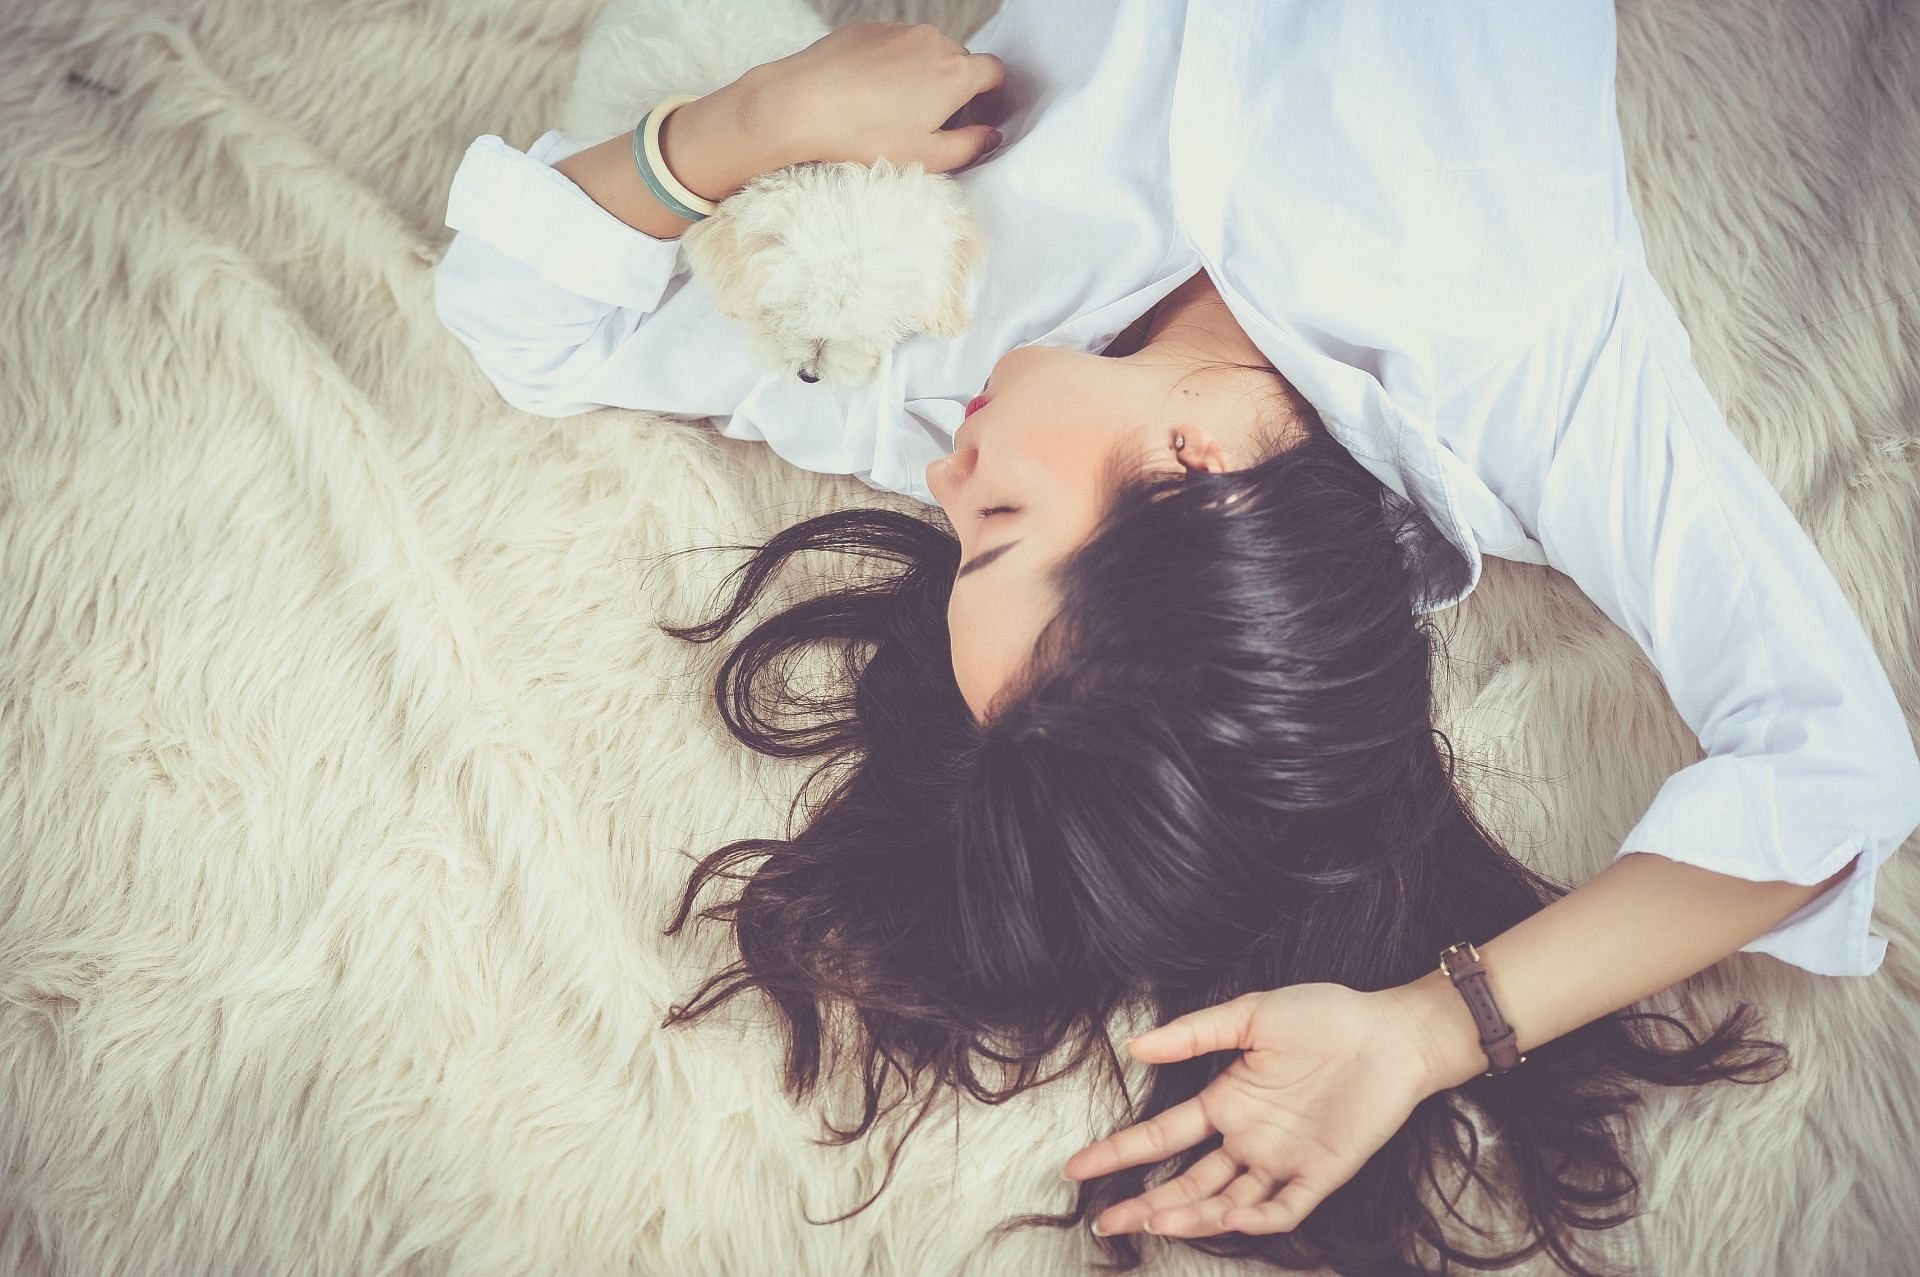 Top celebrities who have insomnia   (image sourced via Pexels / Photo by pixabay)